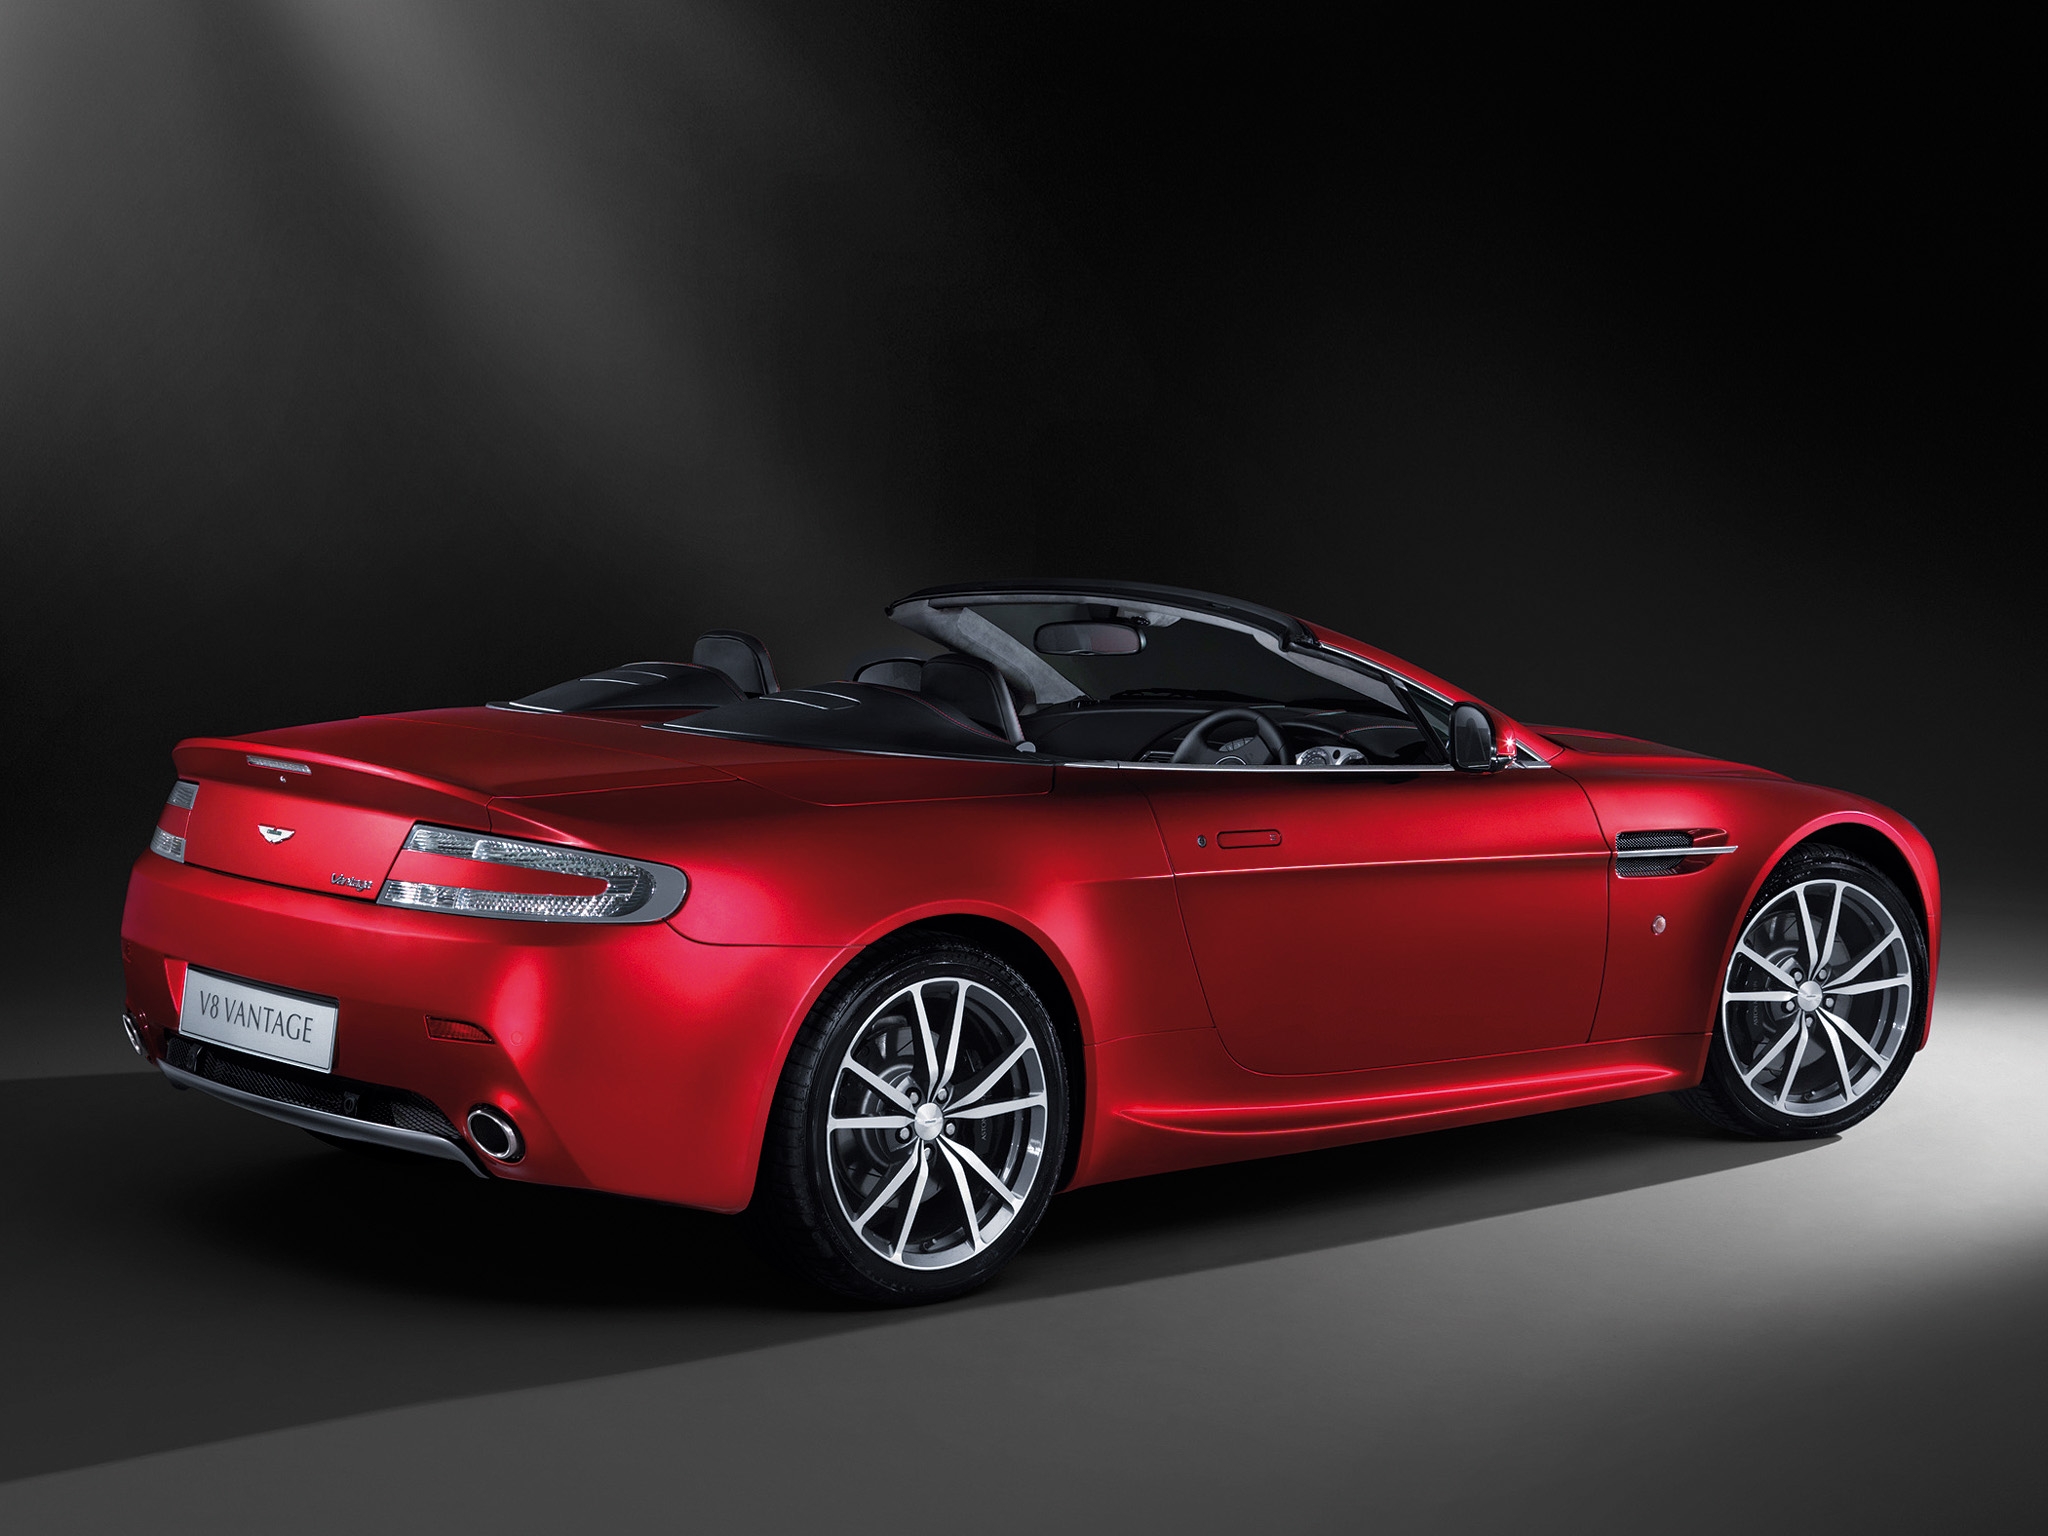 aston martin, cars, red, side view, style, cabriolet, 2008, v8, vantage wallpapers for tablet